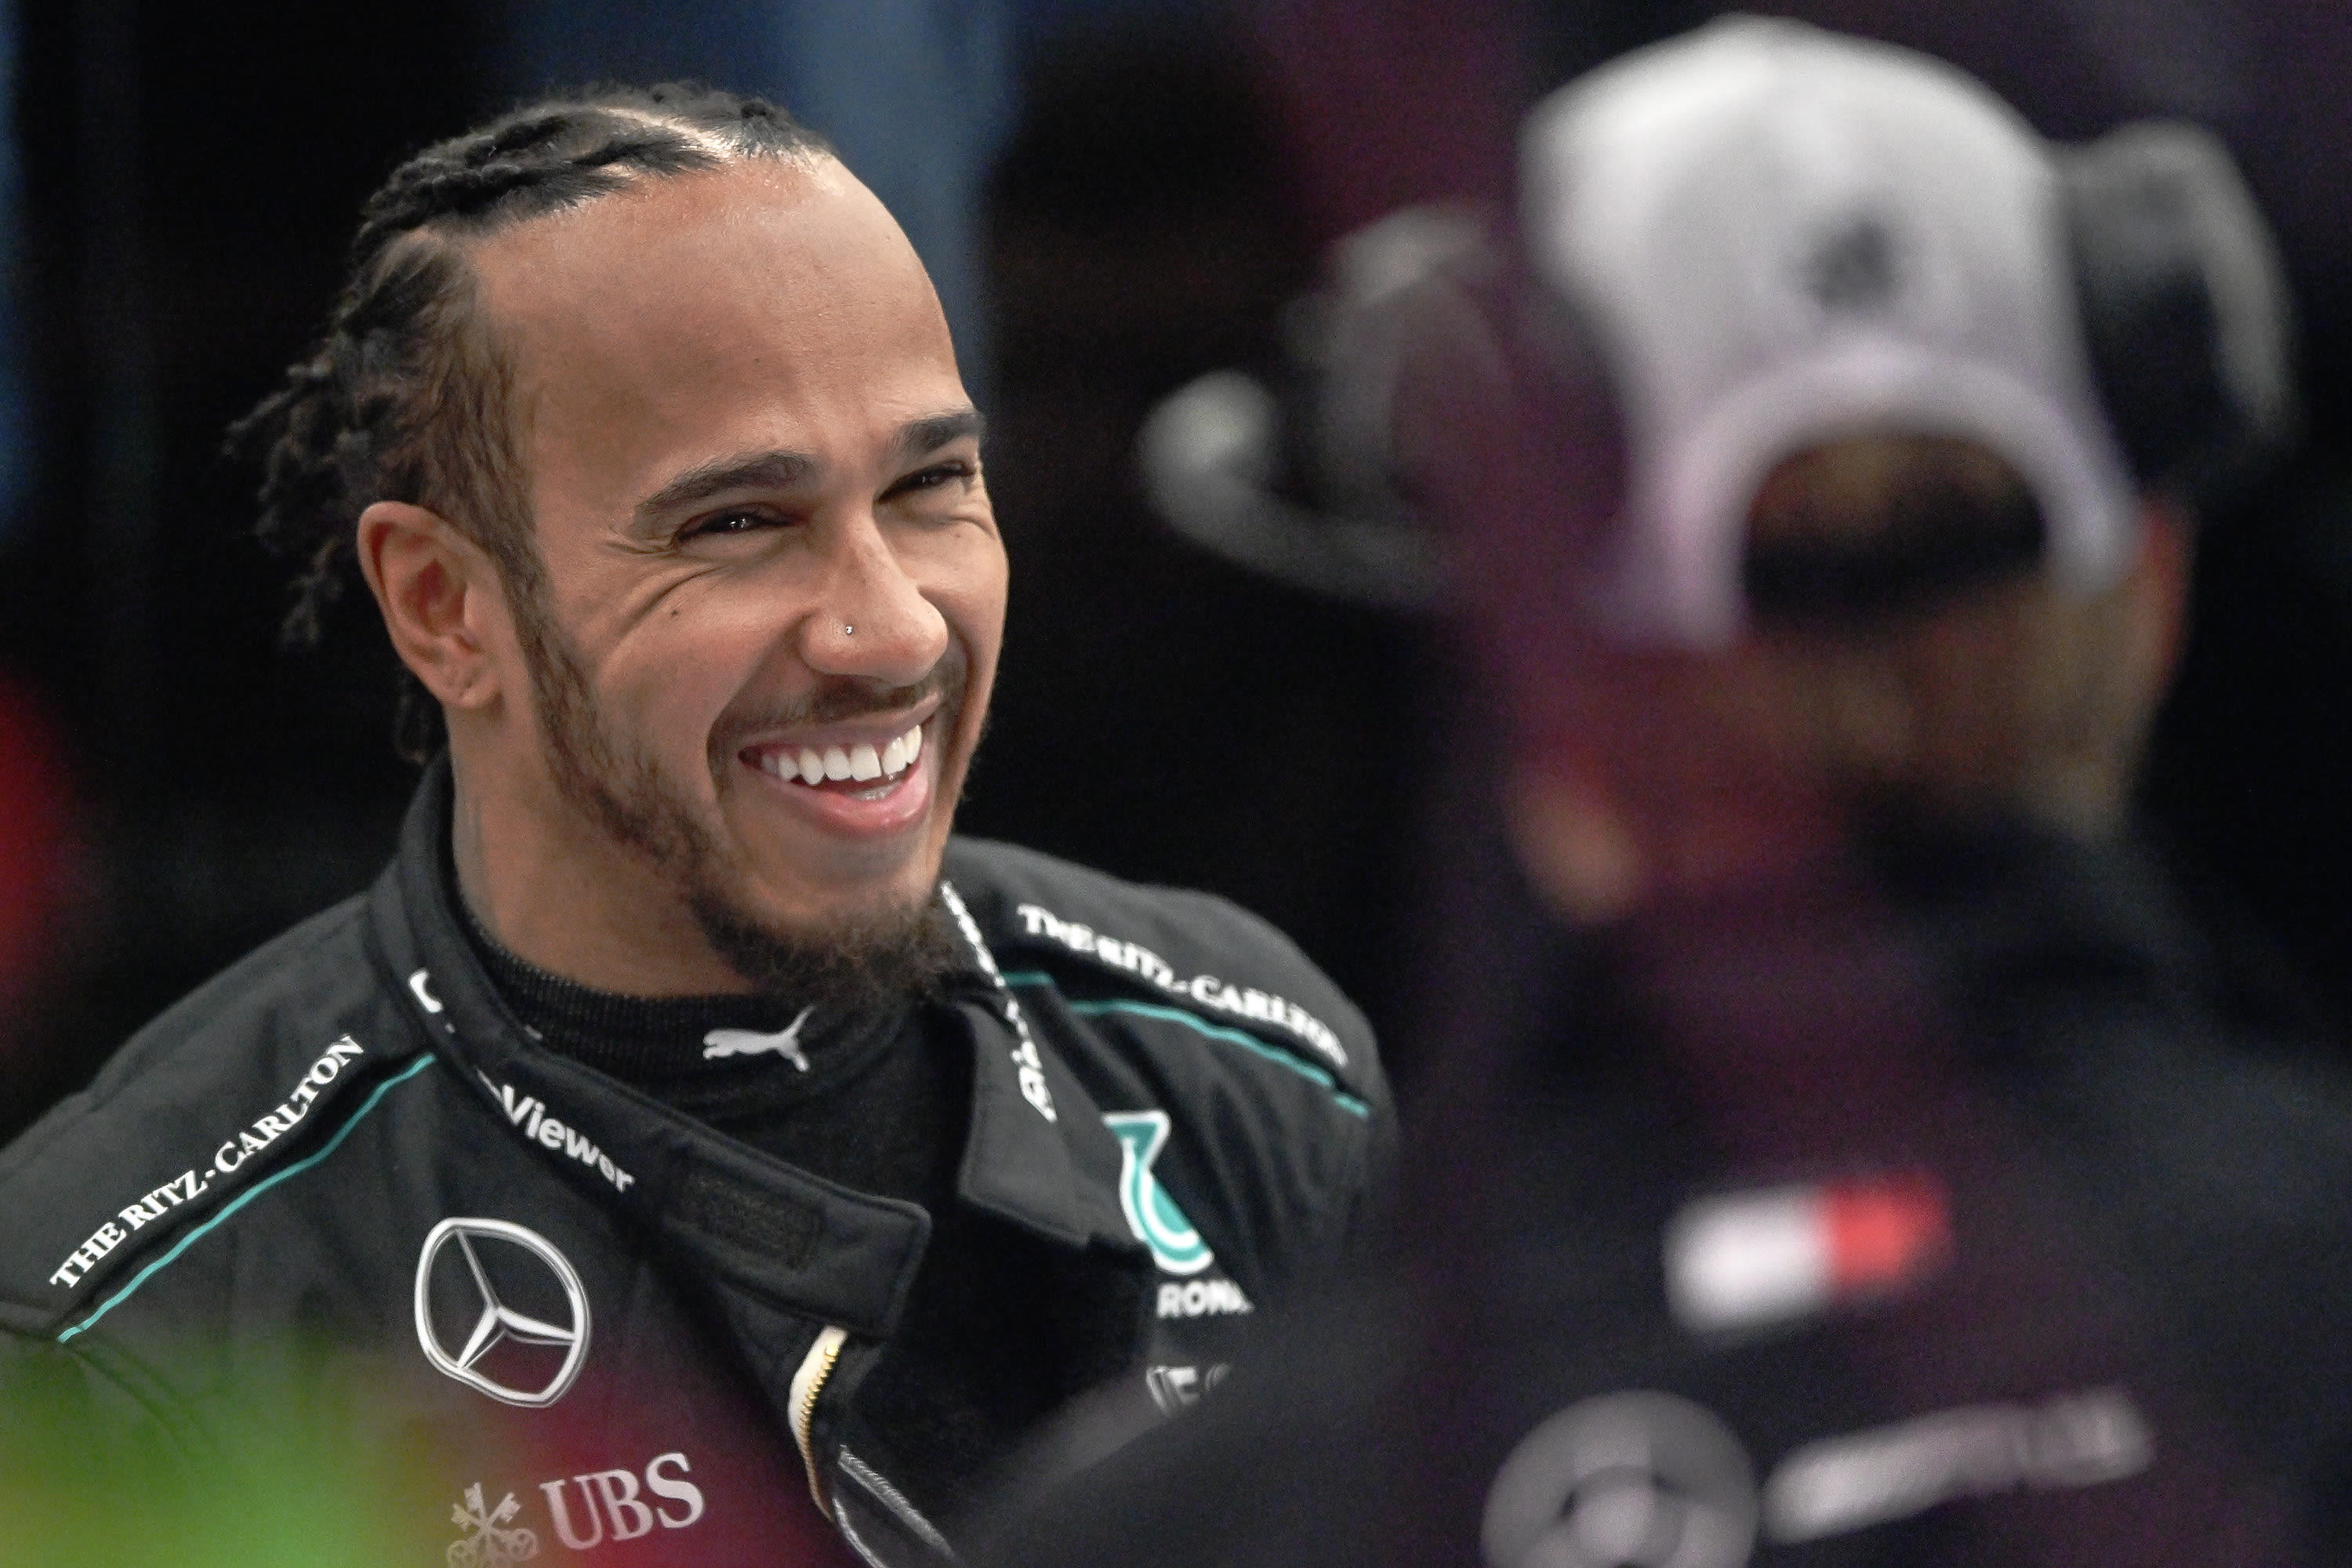 Lewis Hamilton 'Ready For One Hell Of A Fight' In Belgian Grand Prix